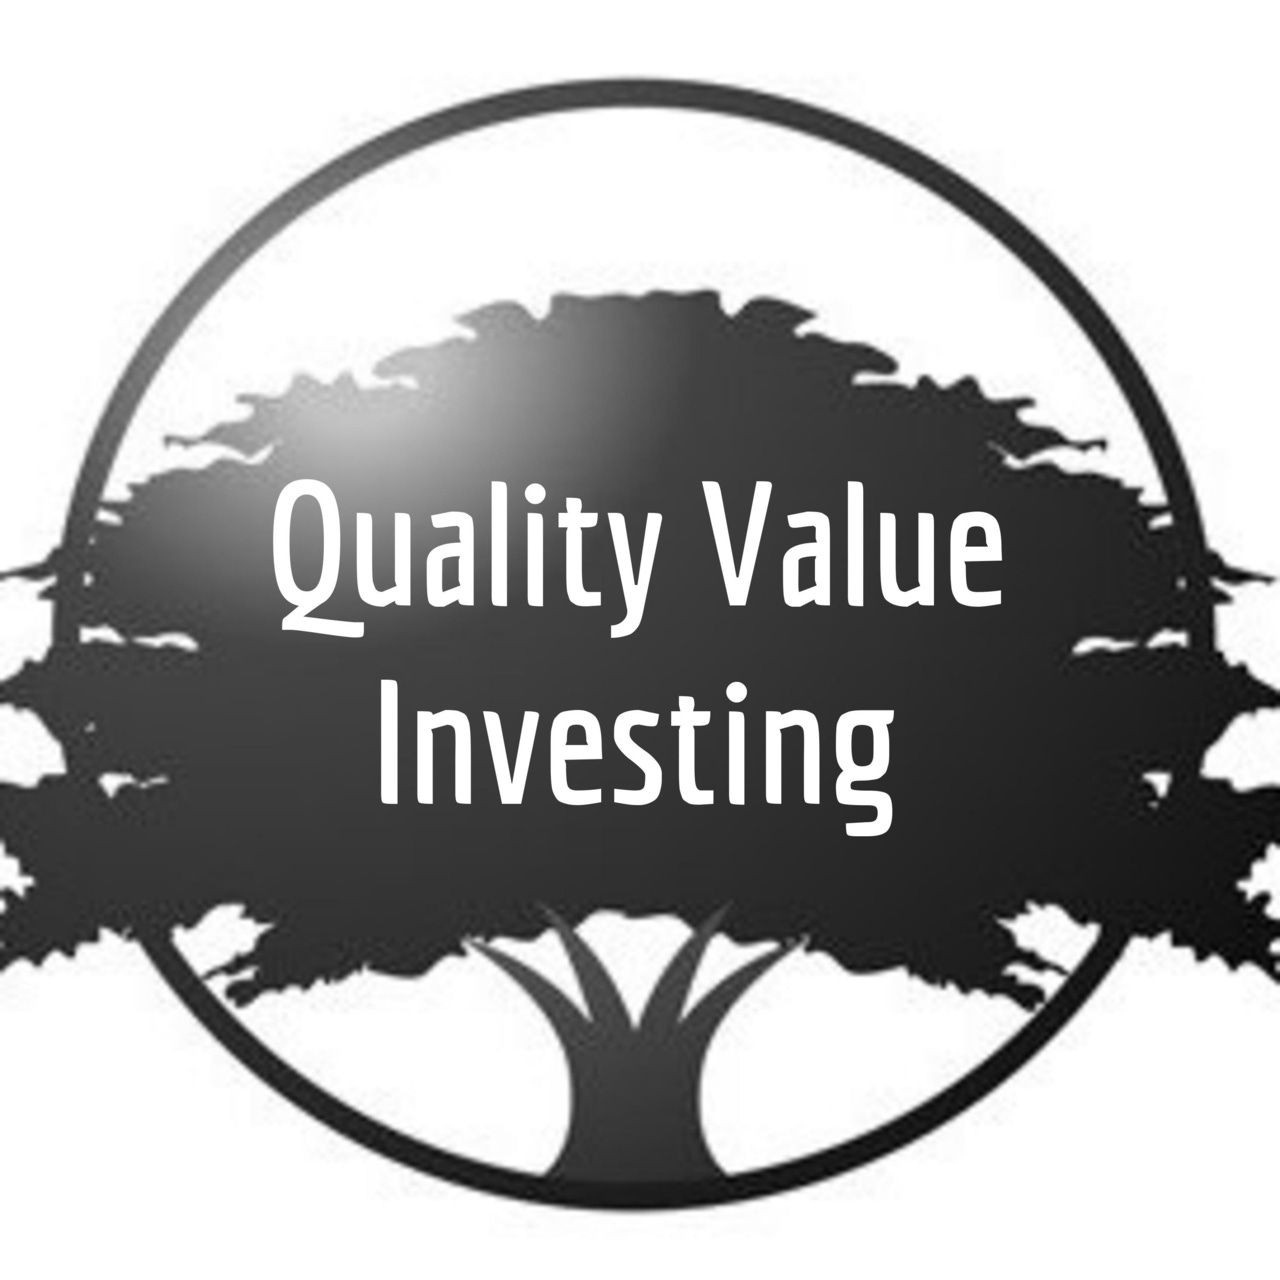 Quality Value Investing